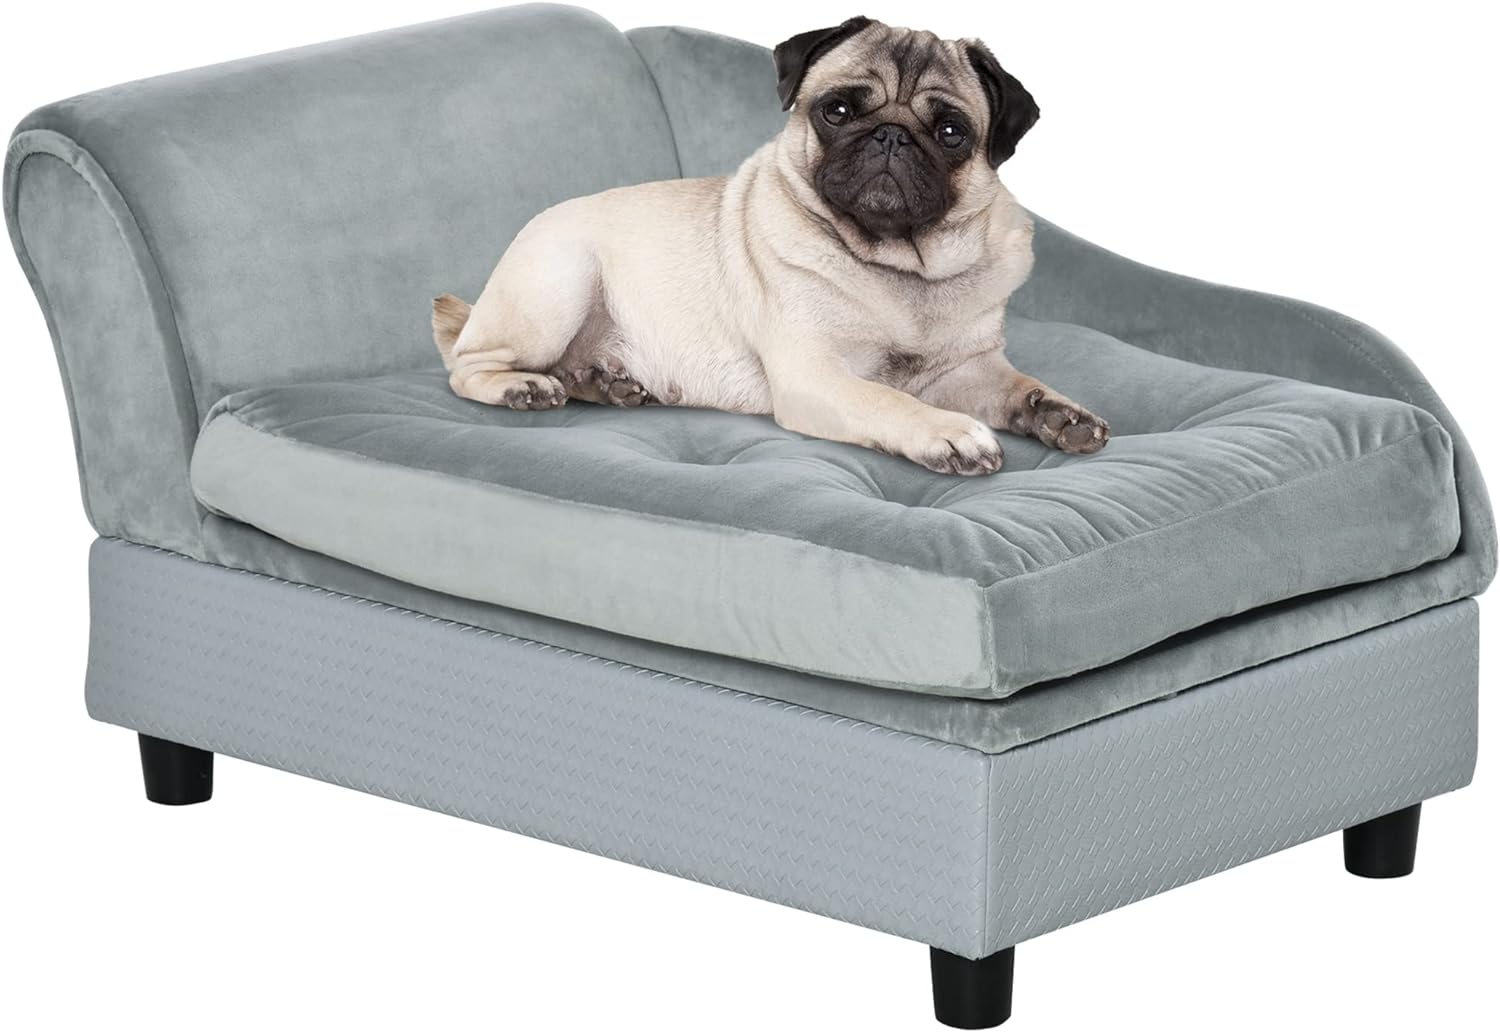 PawHut Luxury Fancy Dog Bed for Small Dogs